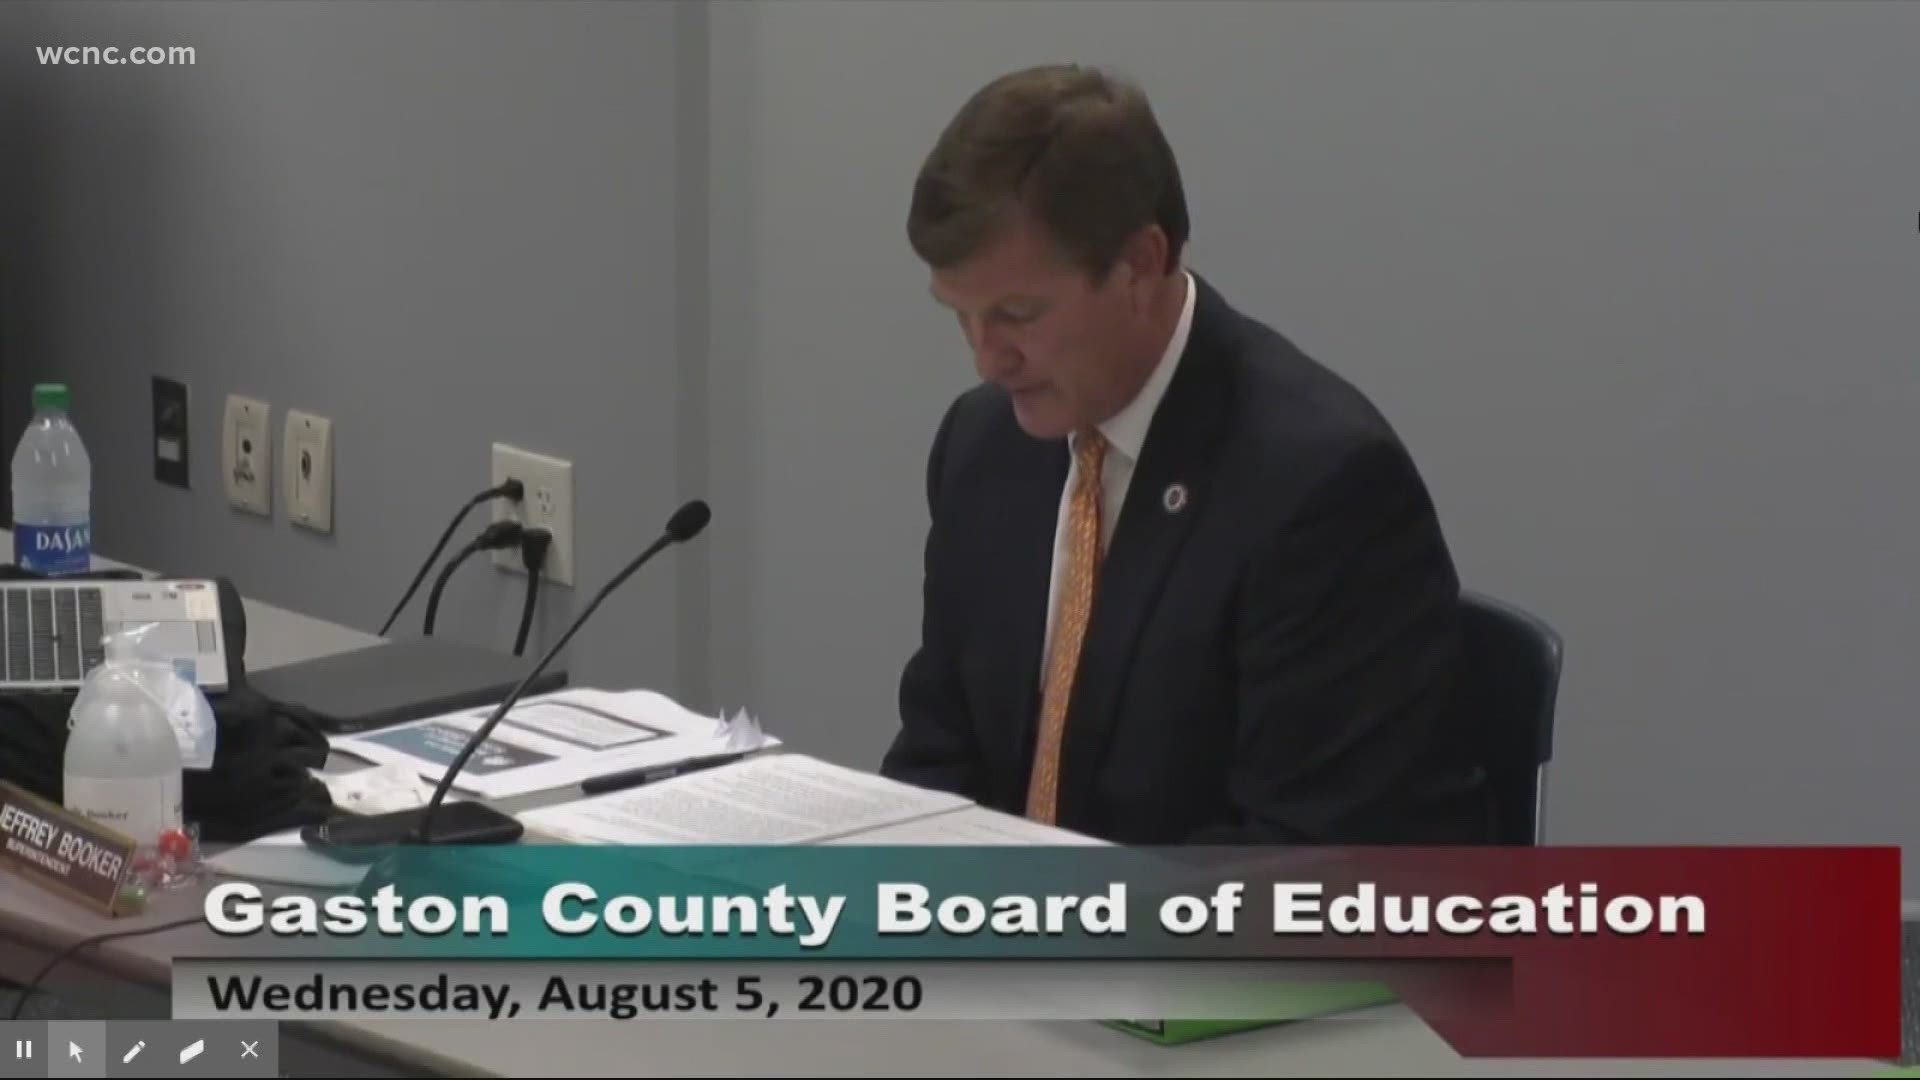 The board of education is meeting Wednesday afternoon to discuss the different plans for back to school.